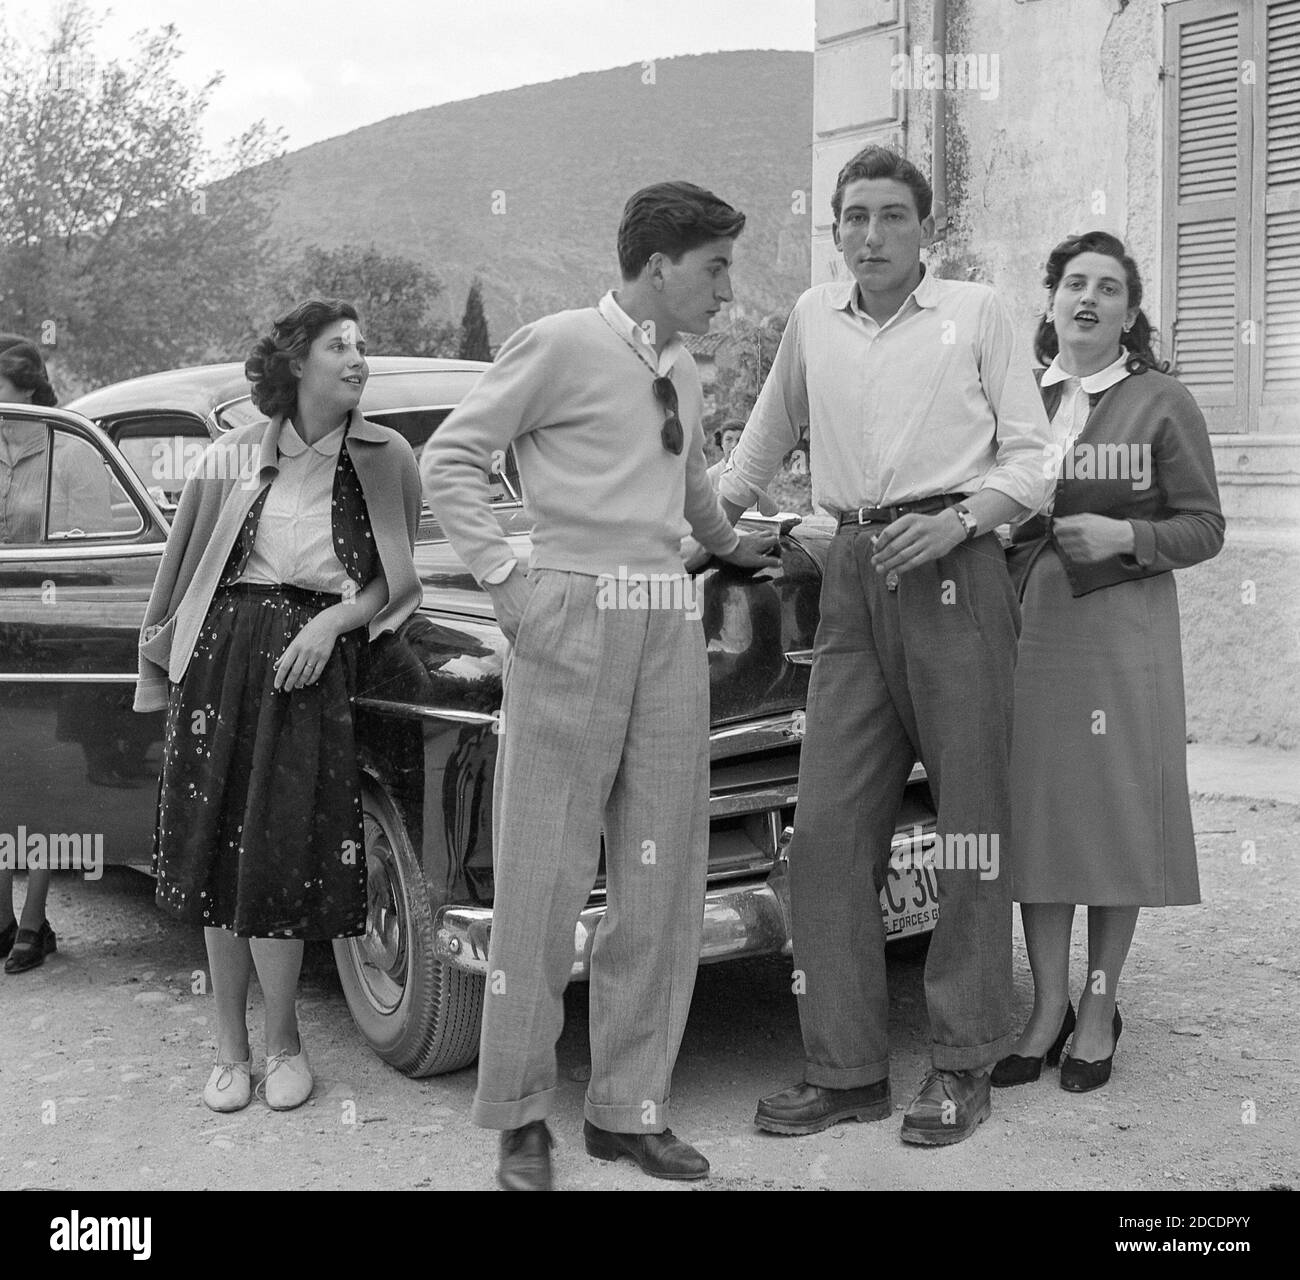 Young Adult Pose For Photos in front of an American Car, 1950s, Italy Stock Photo